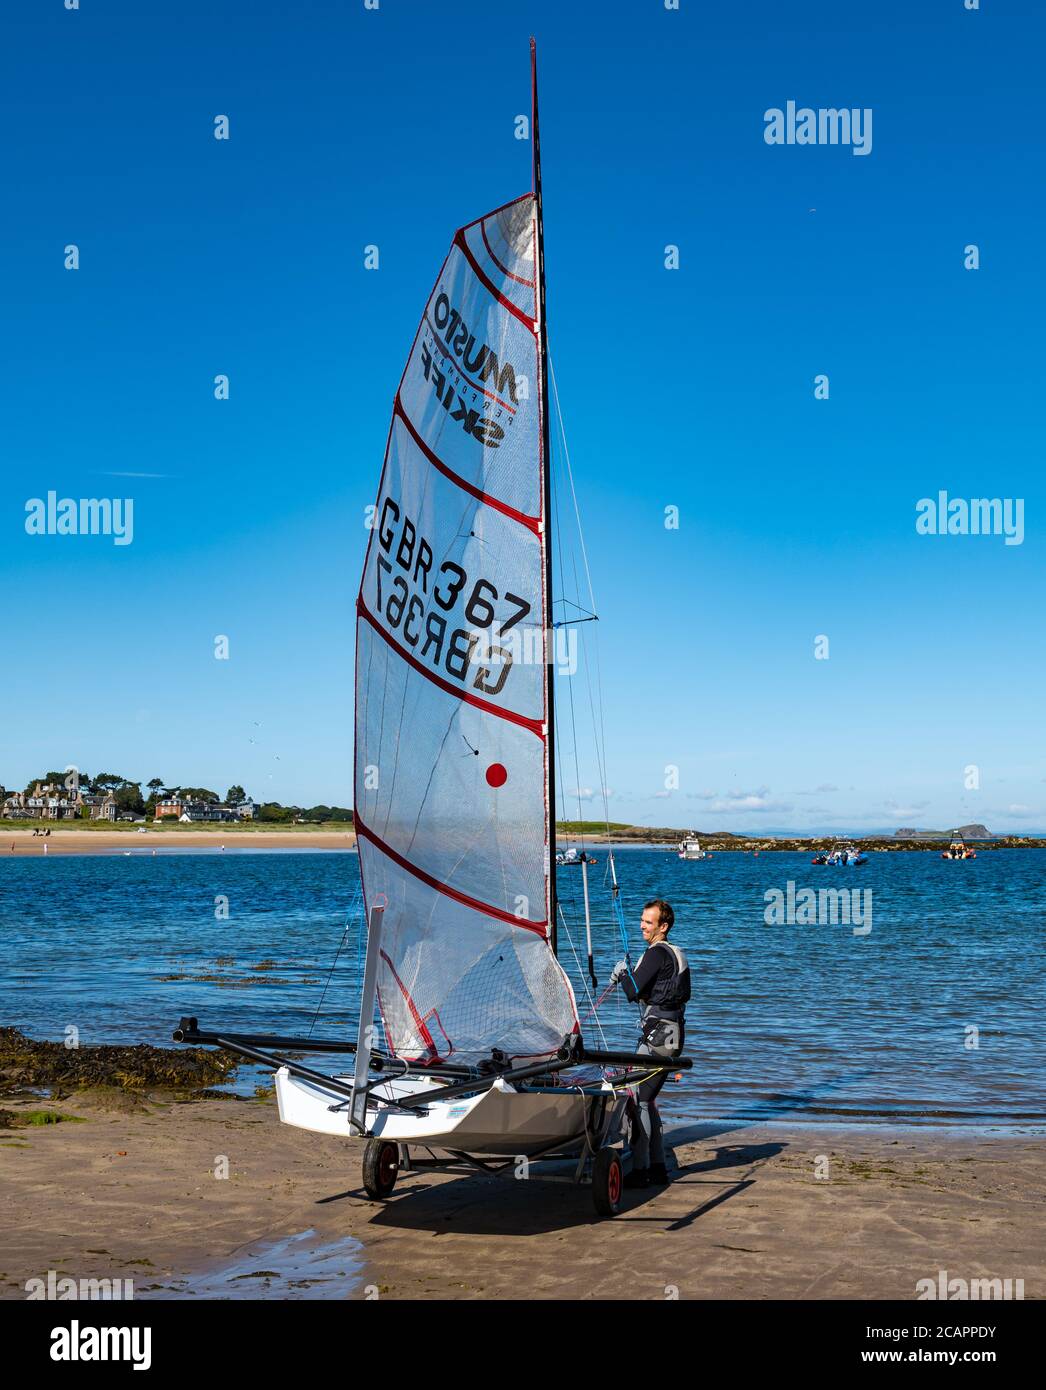 North Berwick, East Lothian, Scotland, 8th August 2020. UK Weather: Perfect day for water sports. A warm sunny day in the Firth of Forth attracts people to take to the water. East Lothian Yacht Club holds a club race as a man pulls up a sail on a Musto skiff sailing dinghy Stock Photo